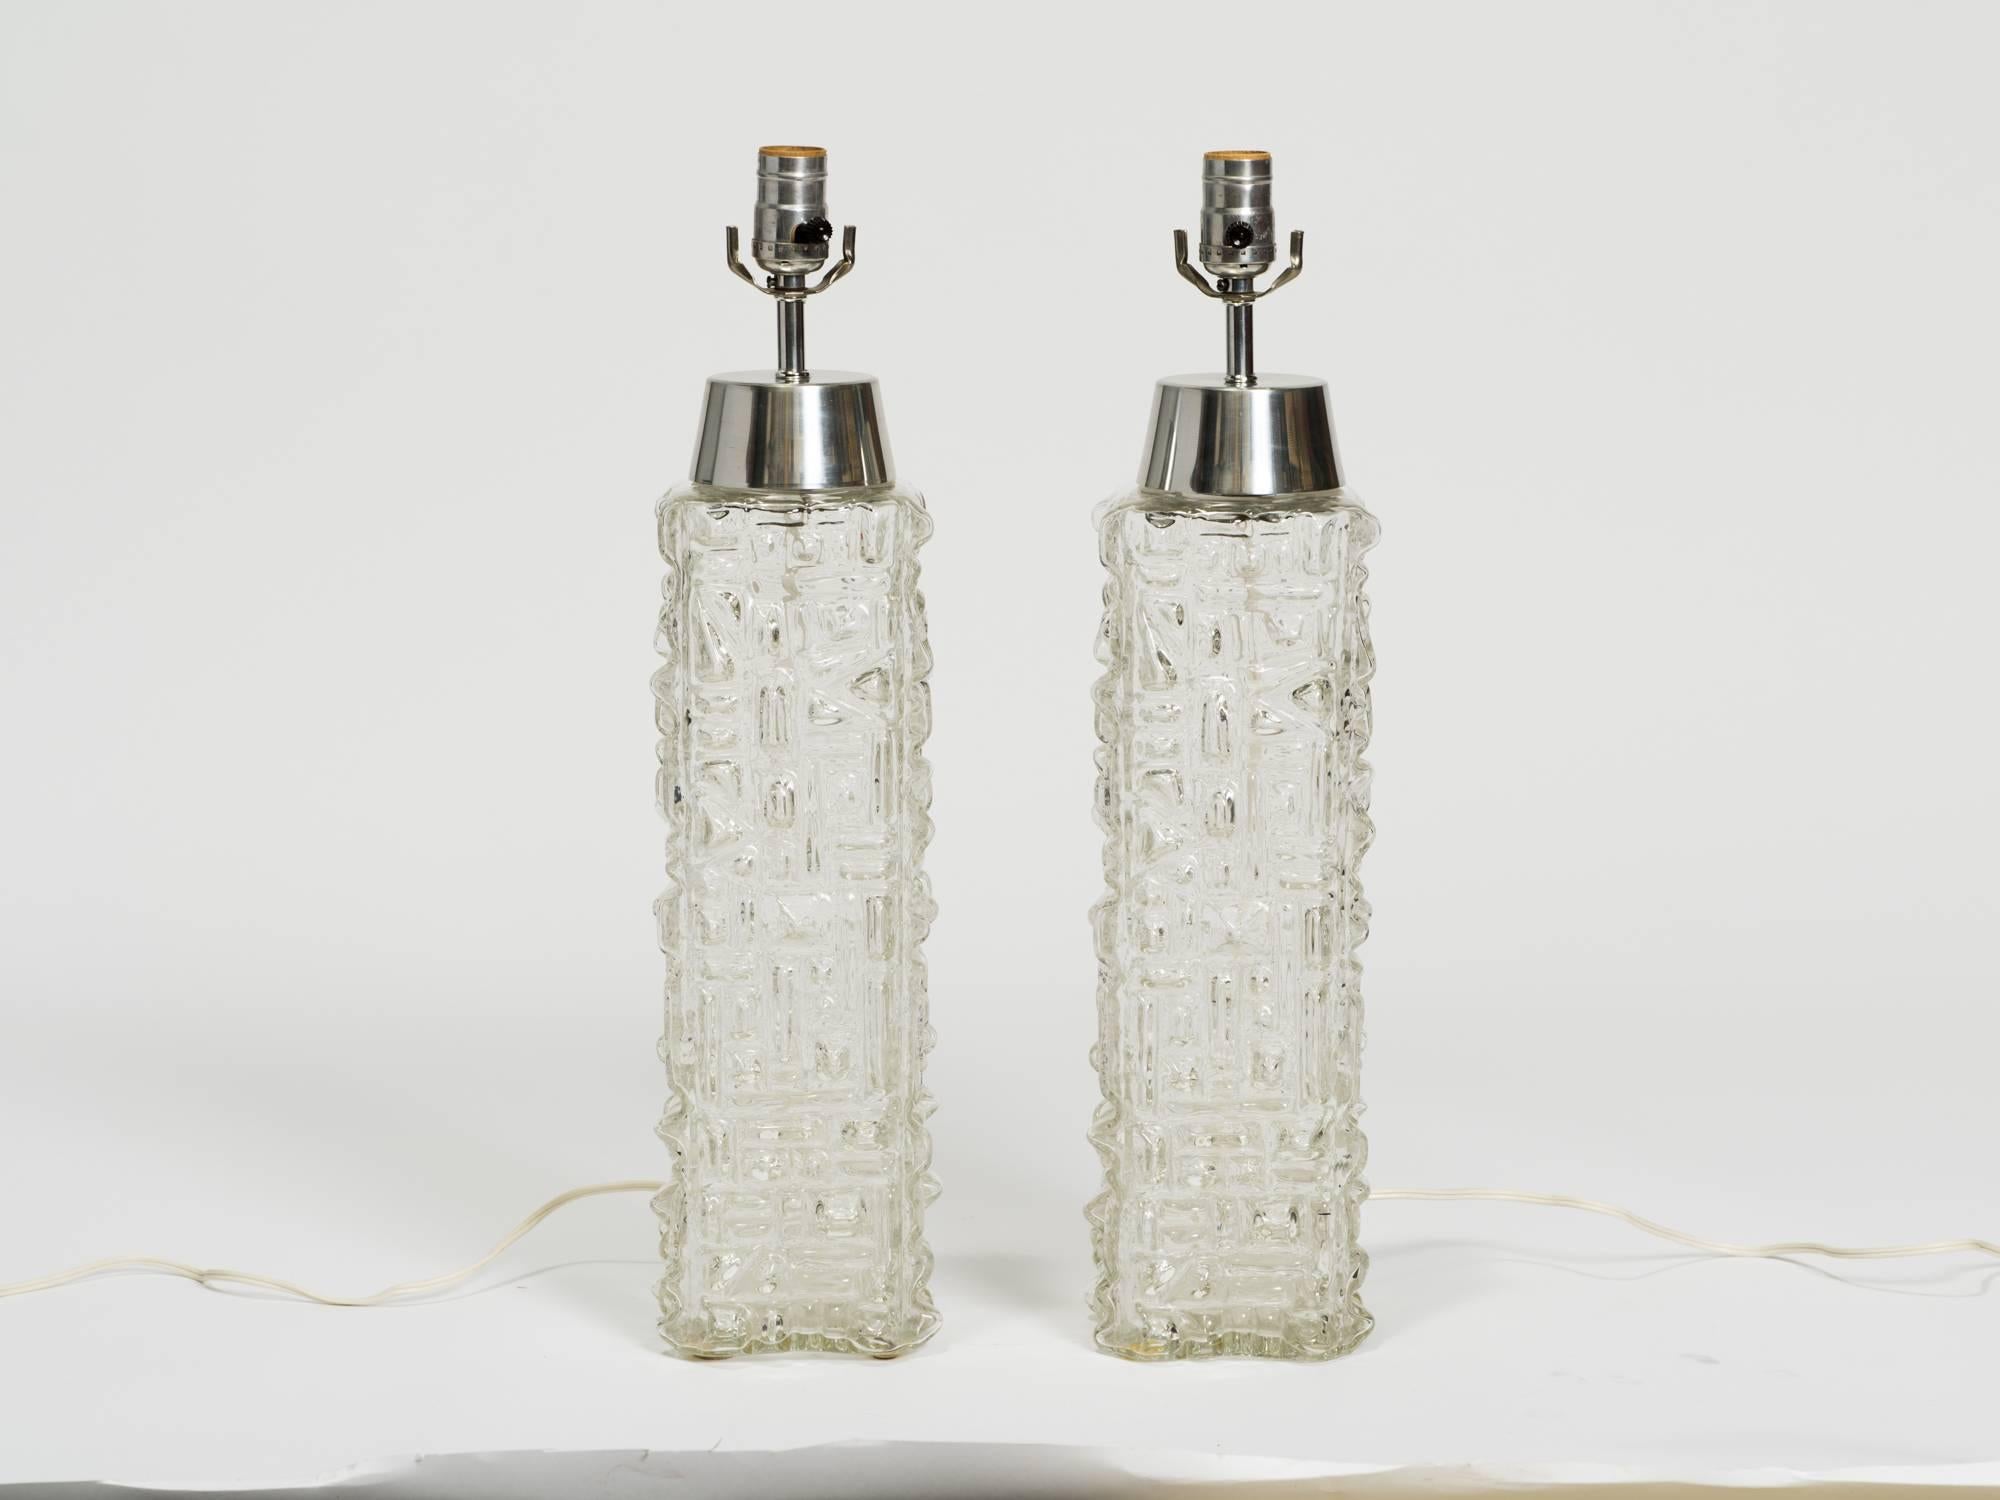 Pair of Scandinavian clear glass table lamps.